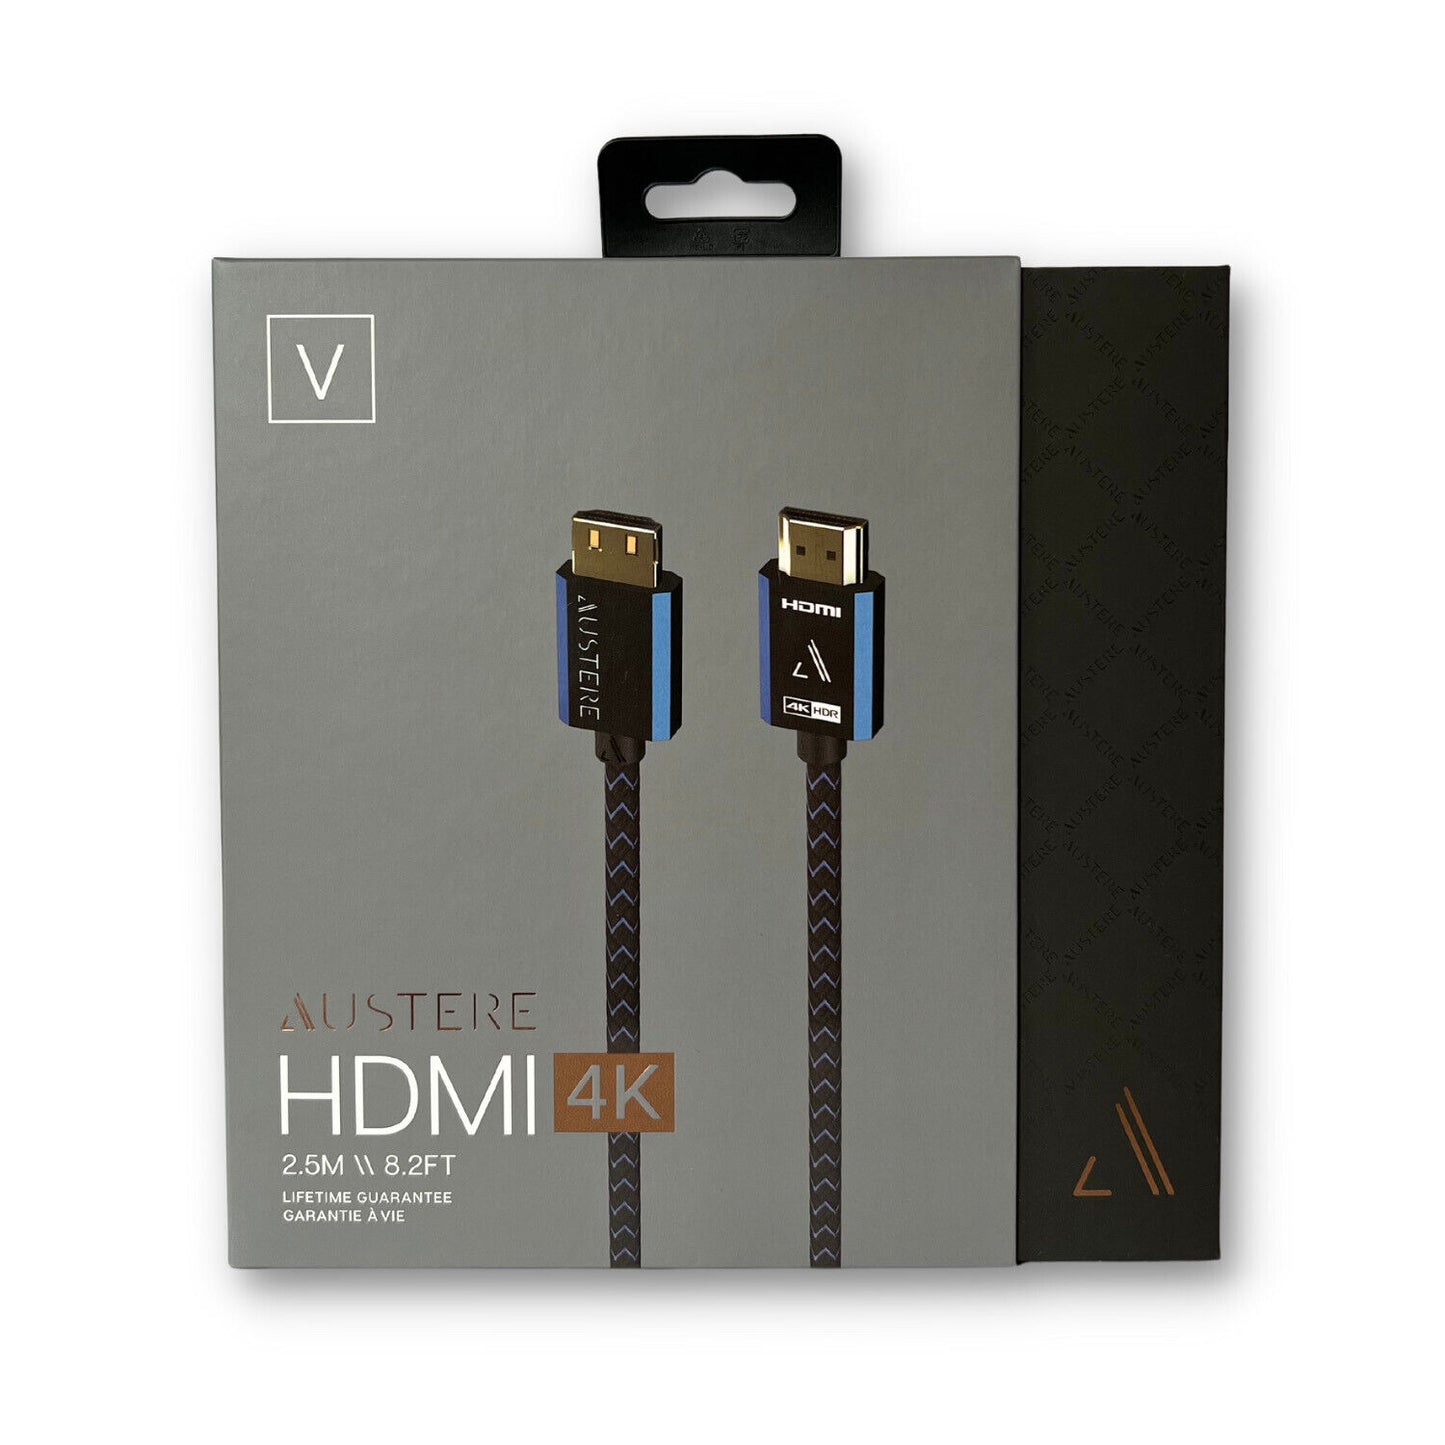 Austere V Series 4K HDMI Cable 2.5m Premium Certified HDMI, 4K HDR, 18Gbps-4K60